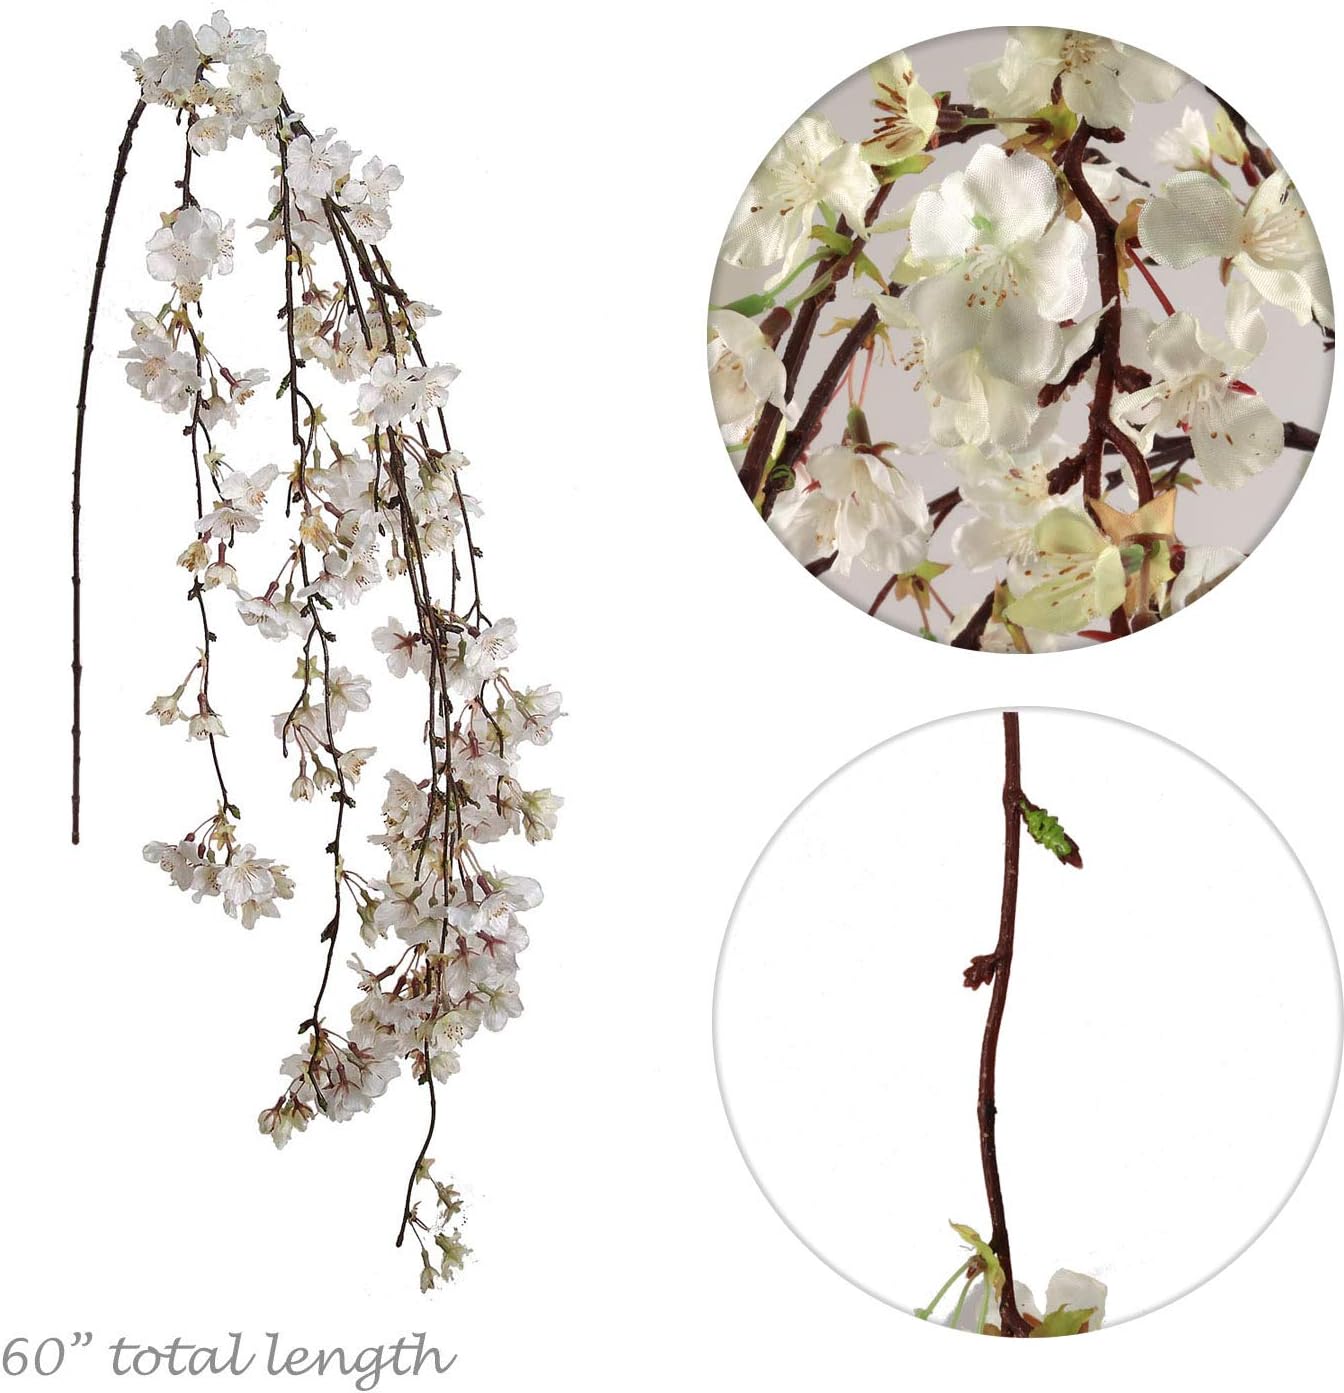 Elegant Floral Charm 60-Inch Hanging Cherry Blossom - Beautiful Artificial Flower Garland for Home and Event Decorations - Enhance Your Space with Captivating Blossoms